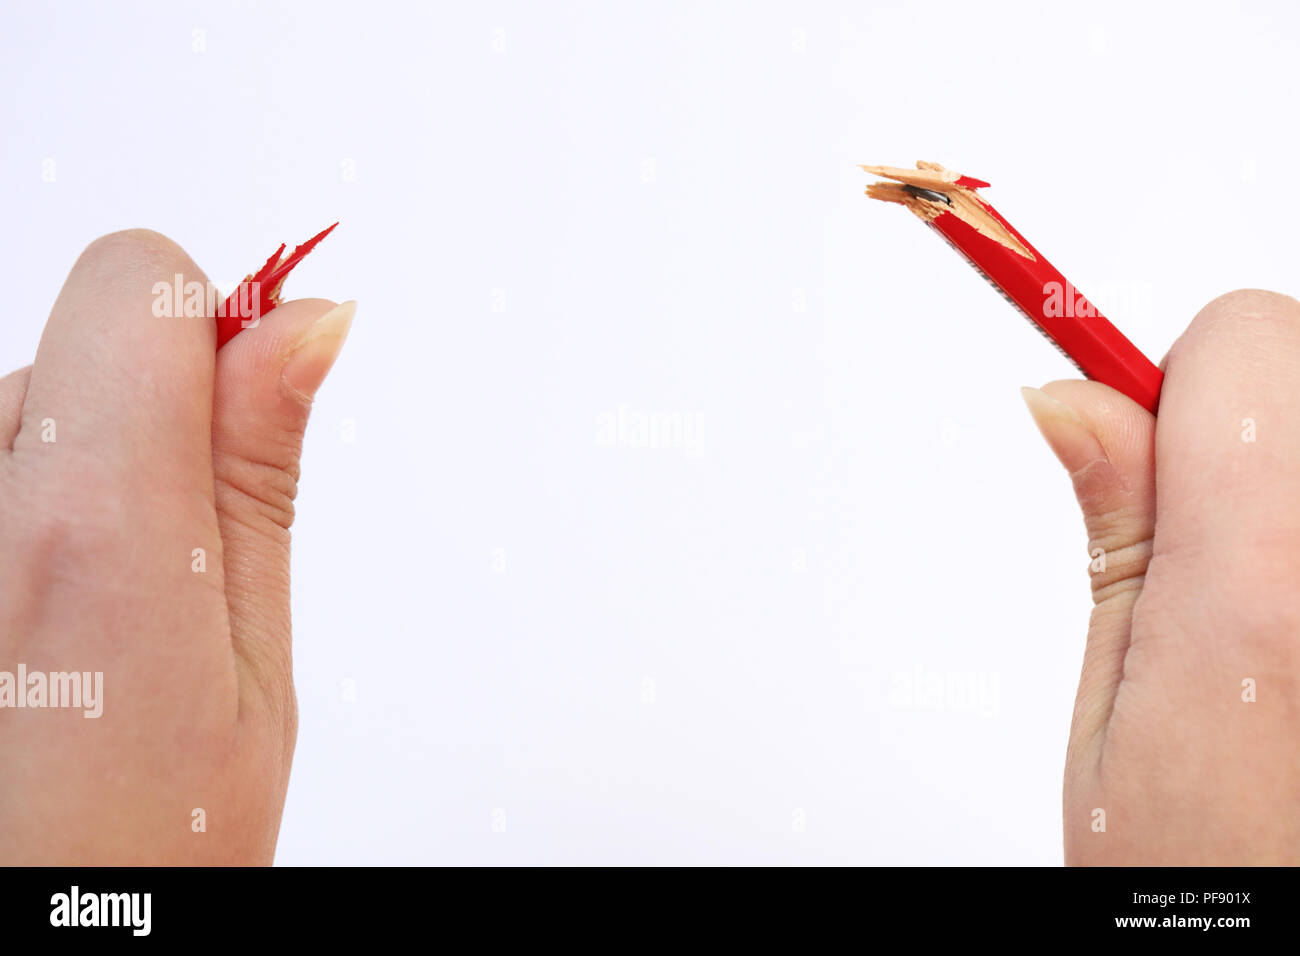 two hands holding a red pencil that has just snapped under the pressure. Concept of stress, anger management, pressure in the work place, parenting an Stock Photo